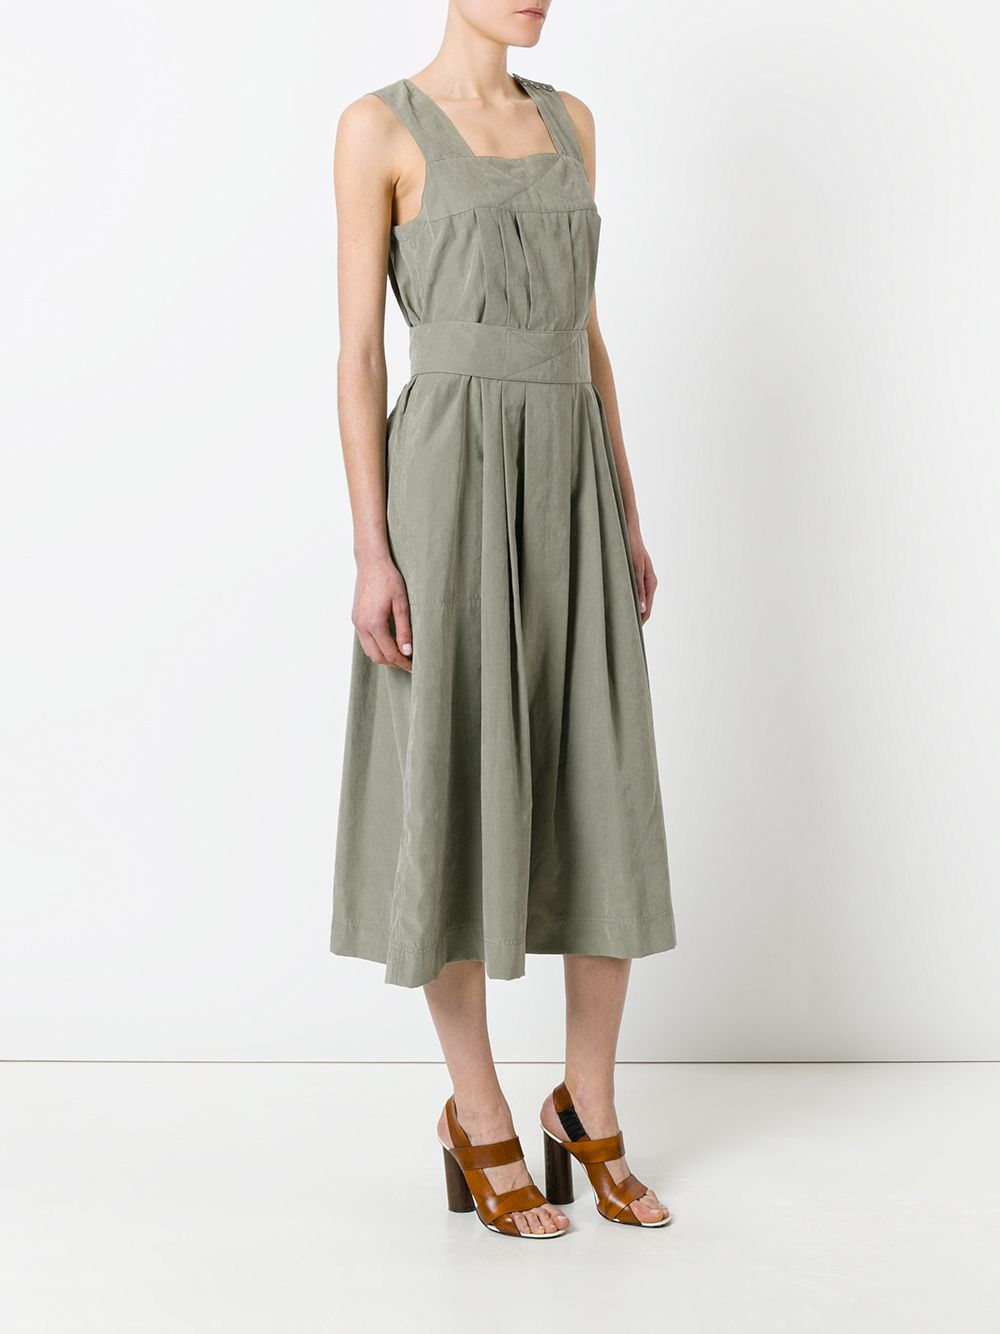 $517 Joseph Pleated Front Dress - Buy Online - Fast Delivery, Price, Photo